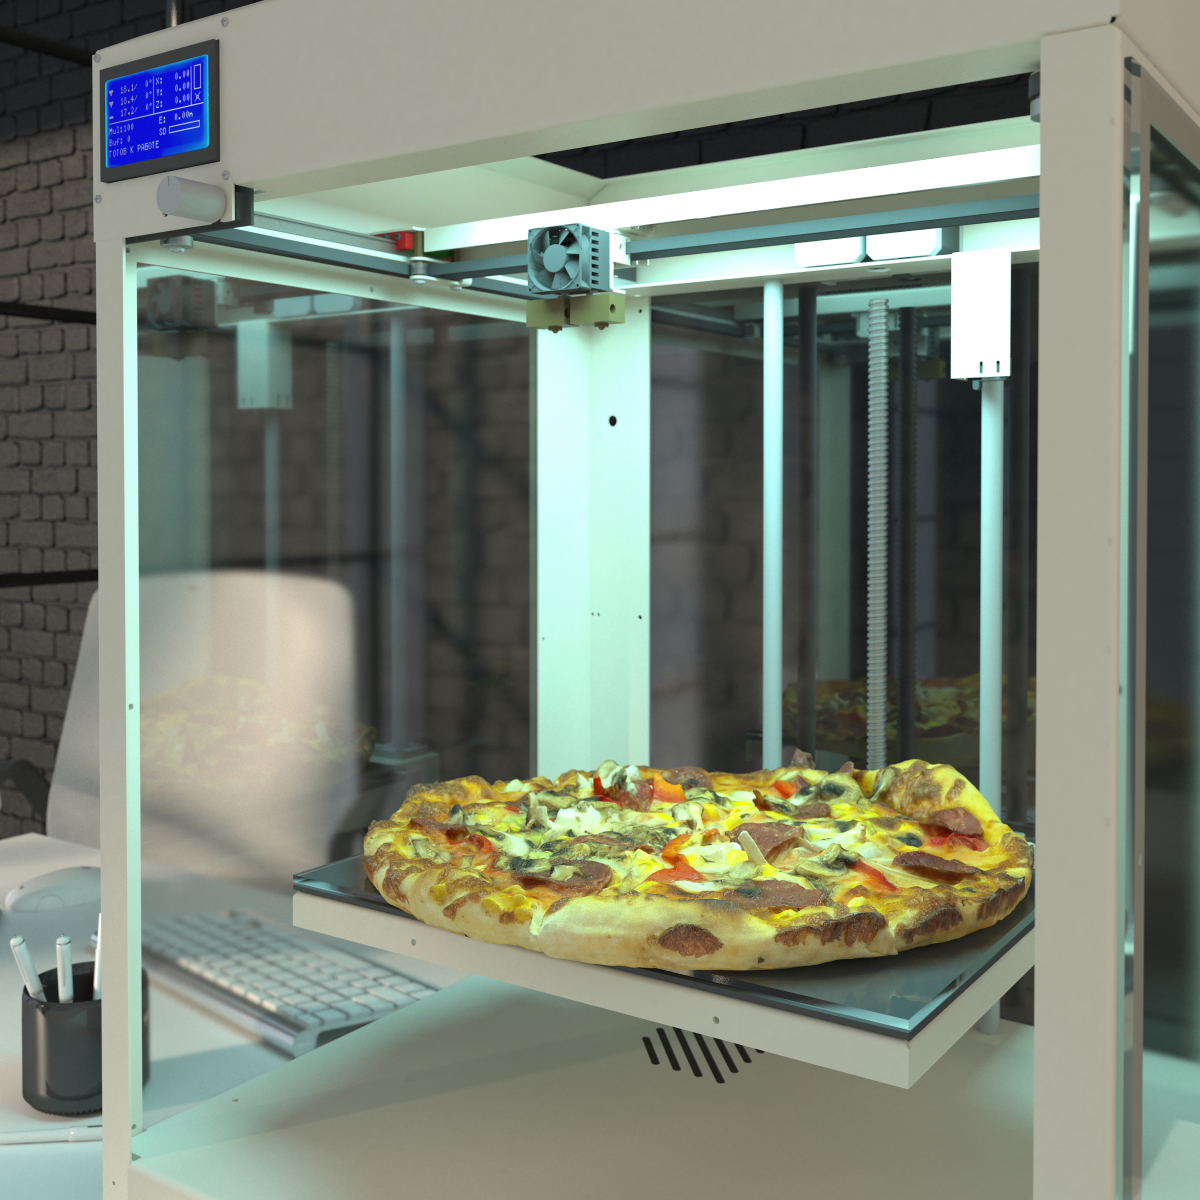 The 3D-printed pizza